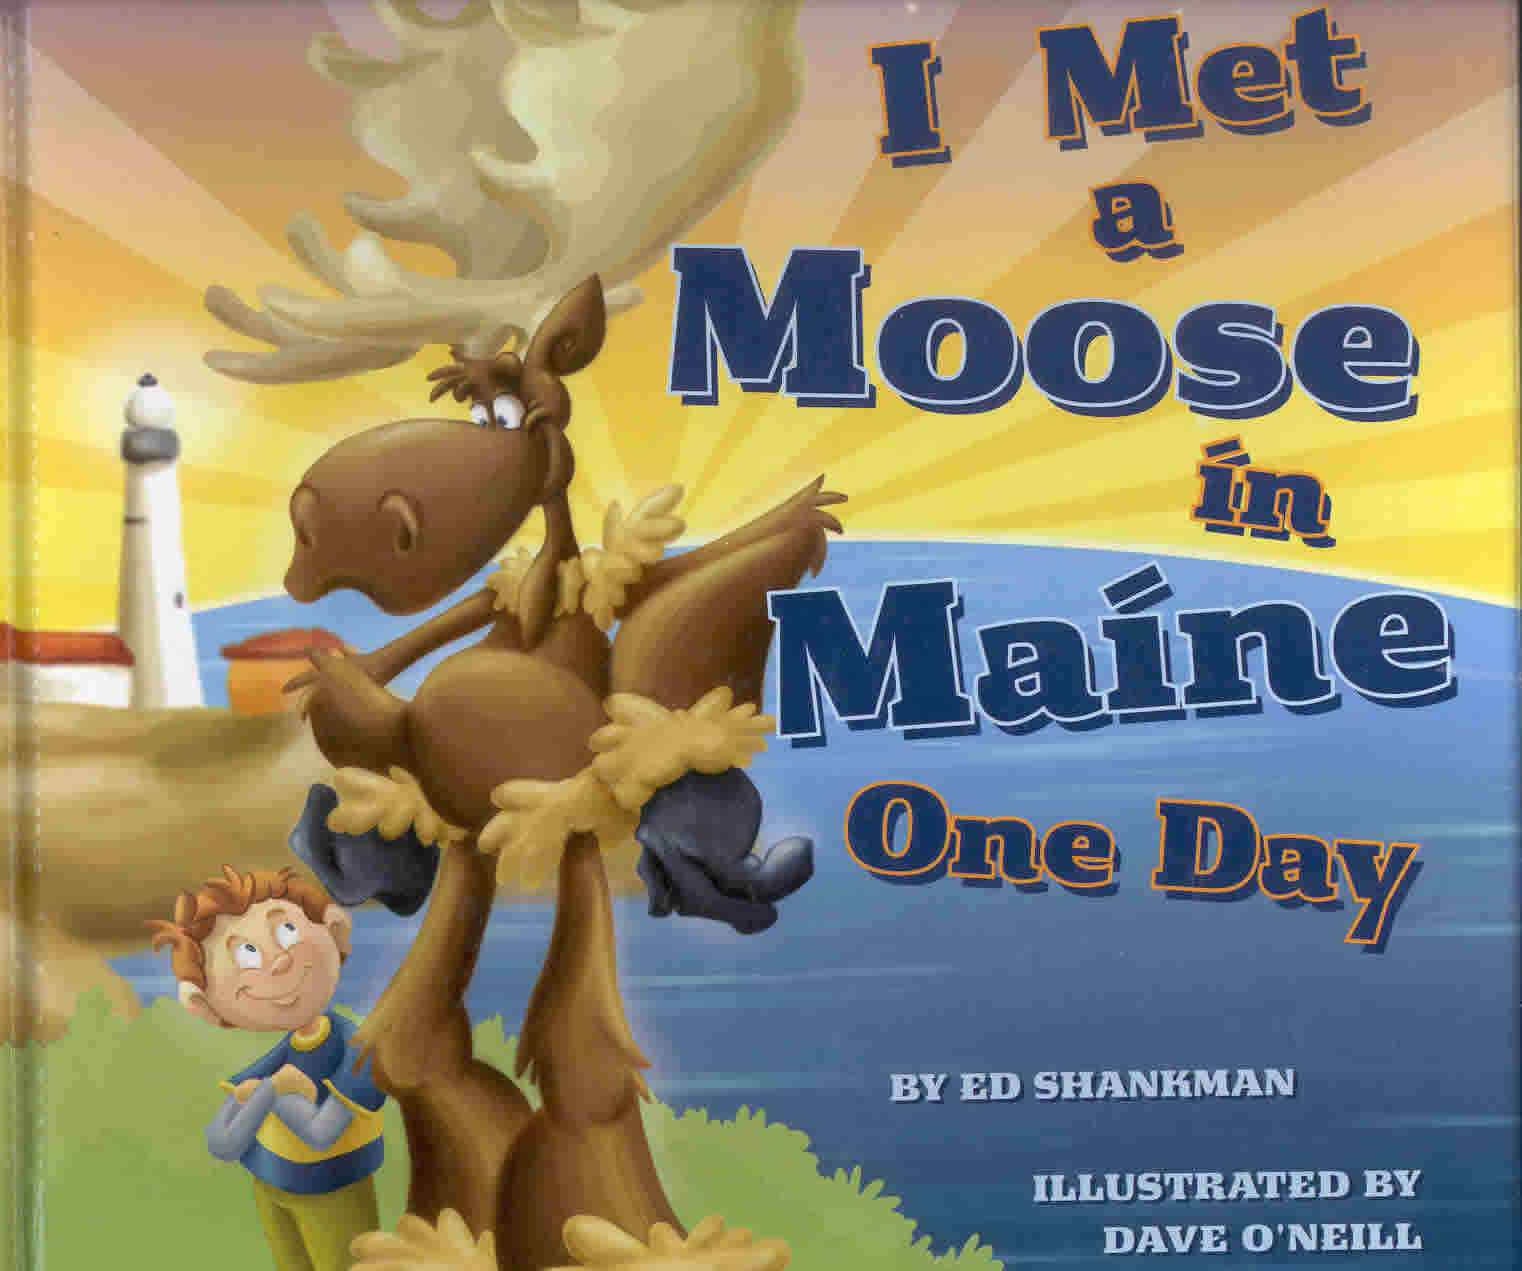 Image of the book cover I Met a Moose in Maine One Day